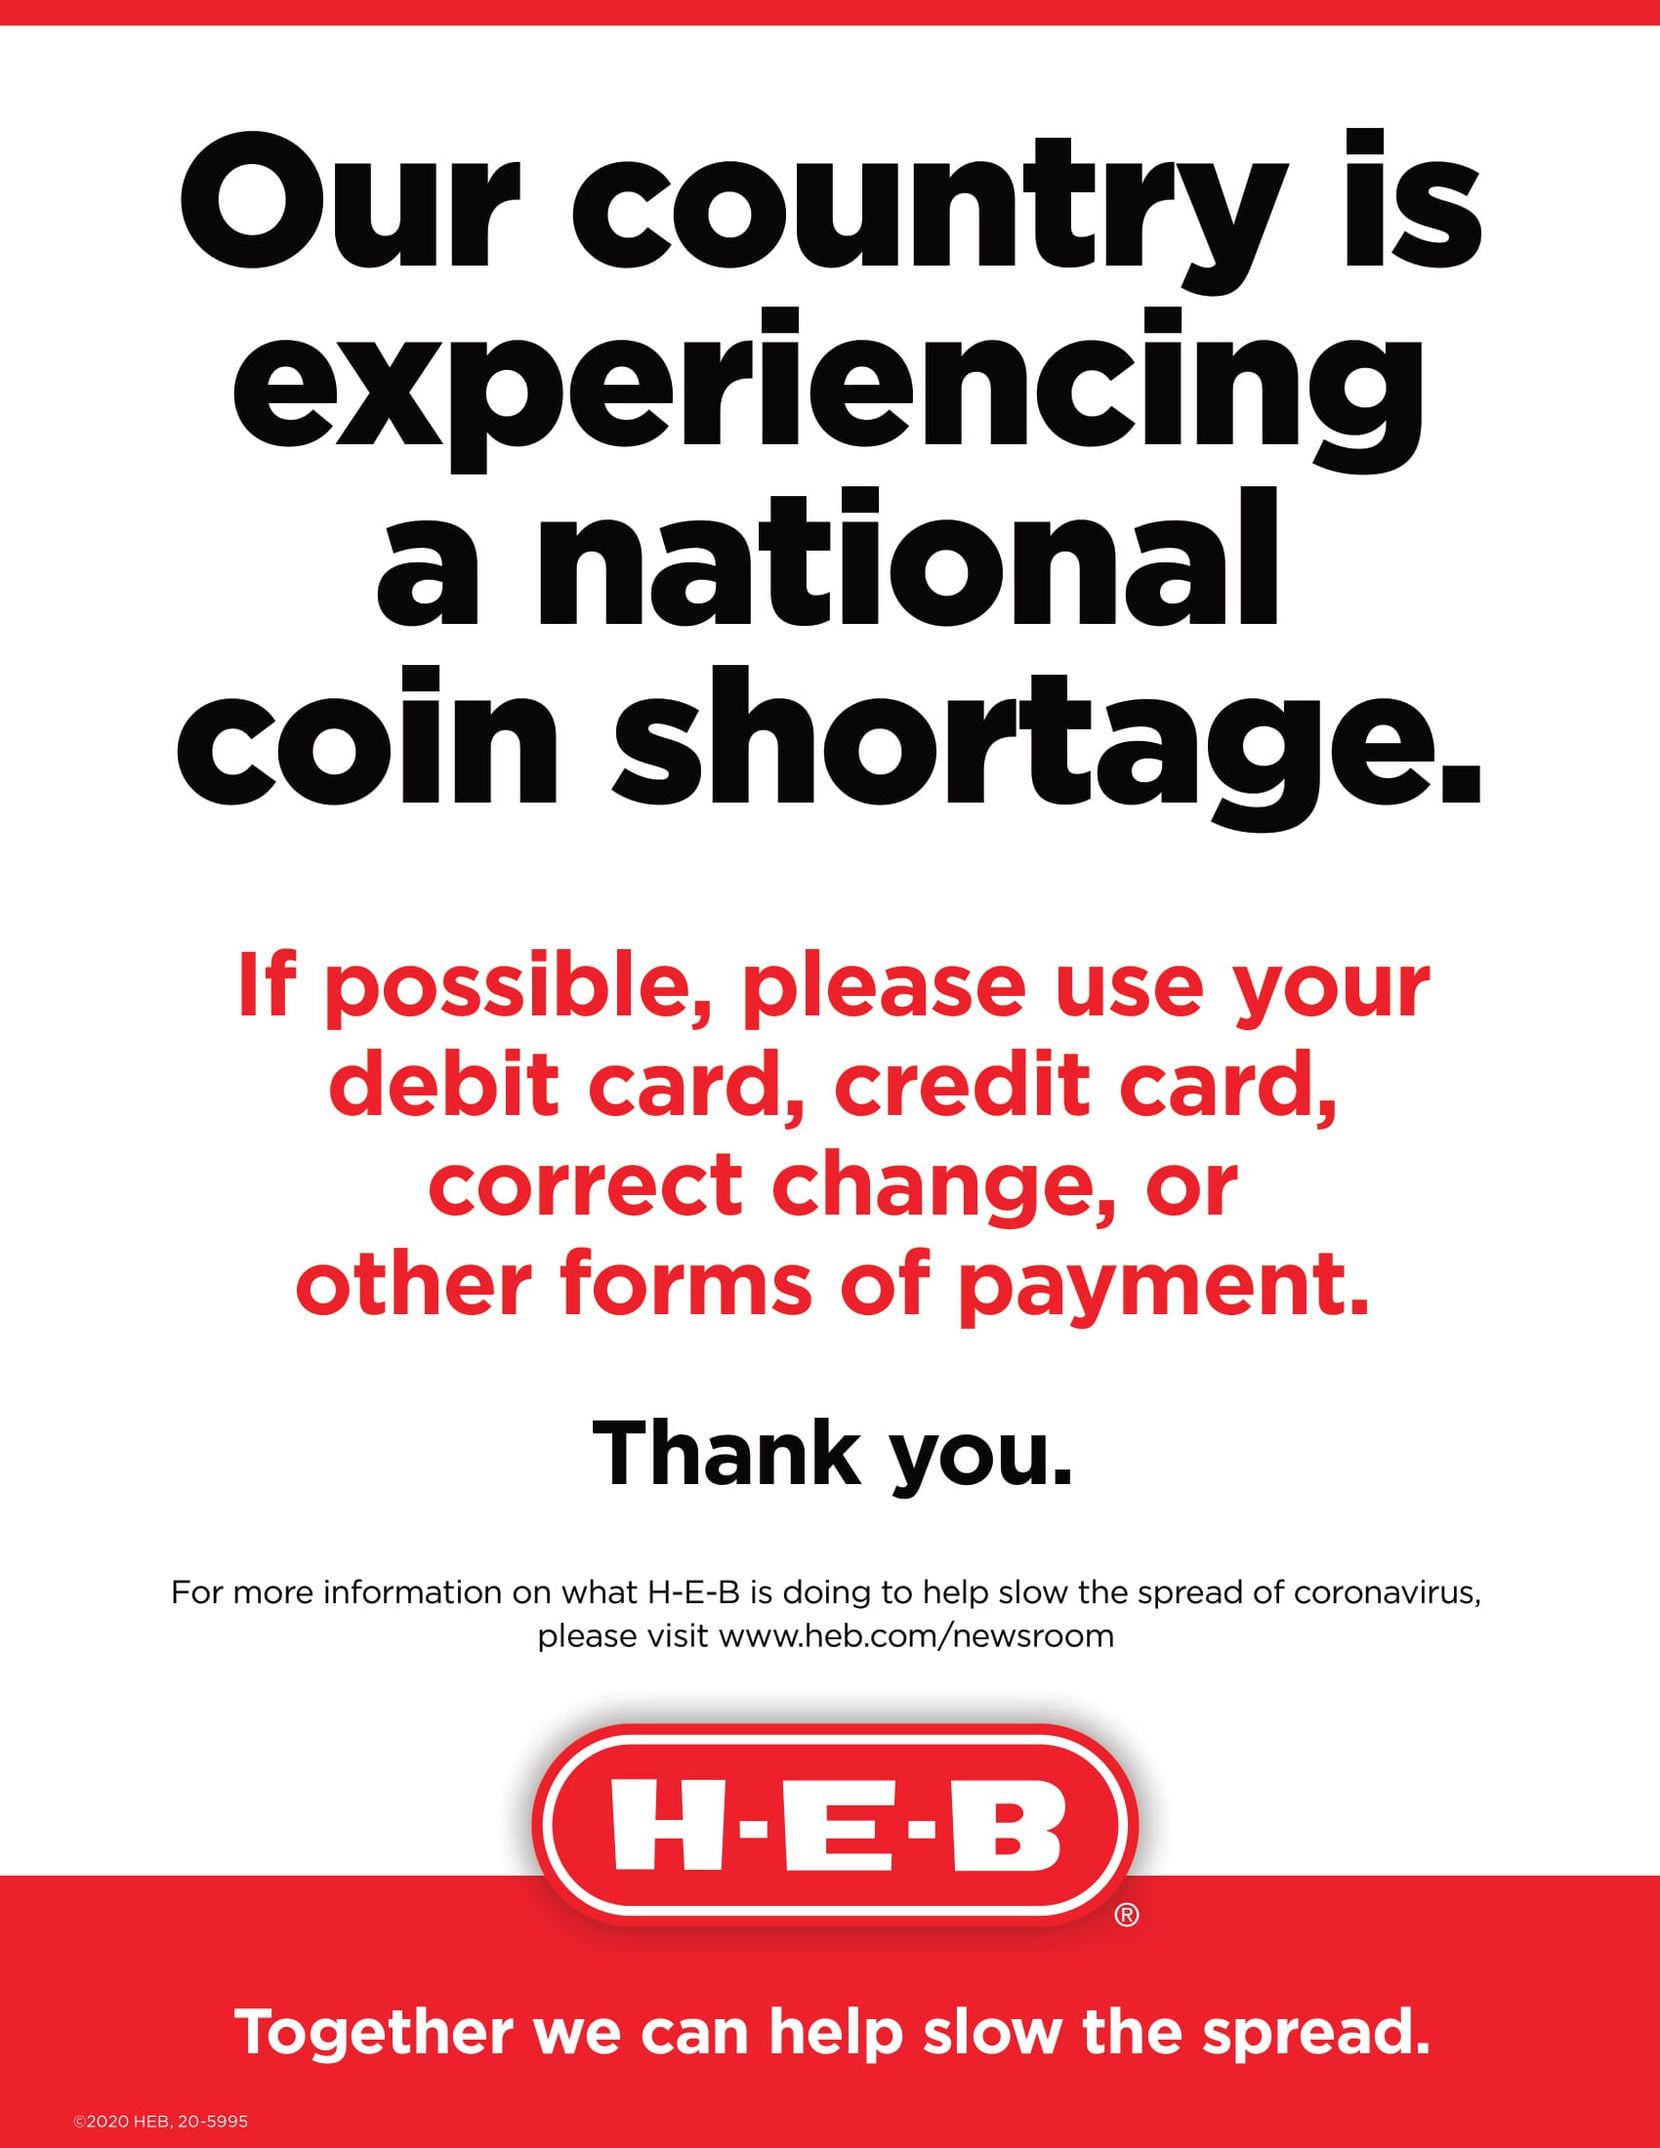 San Antonio-based grocer H-E-B put signs up at its locations to let customers know about the national coin shortage.